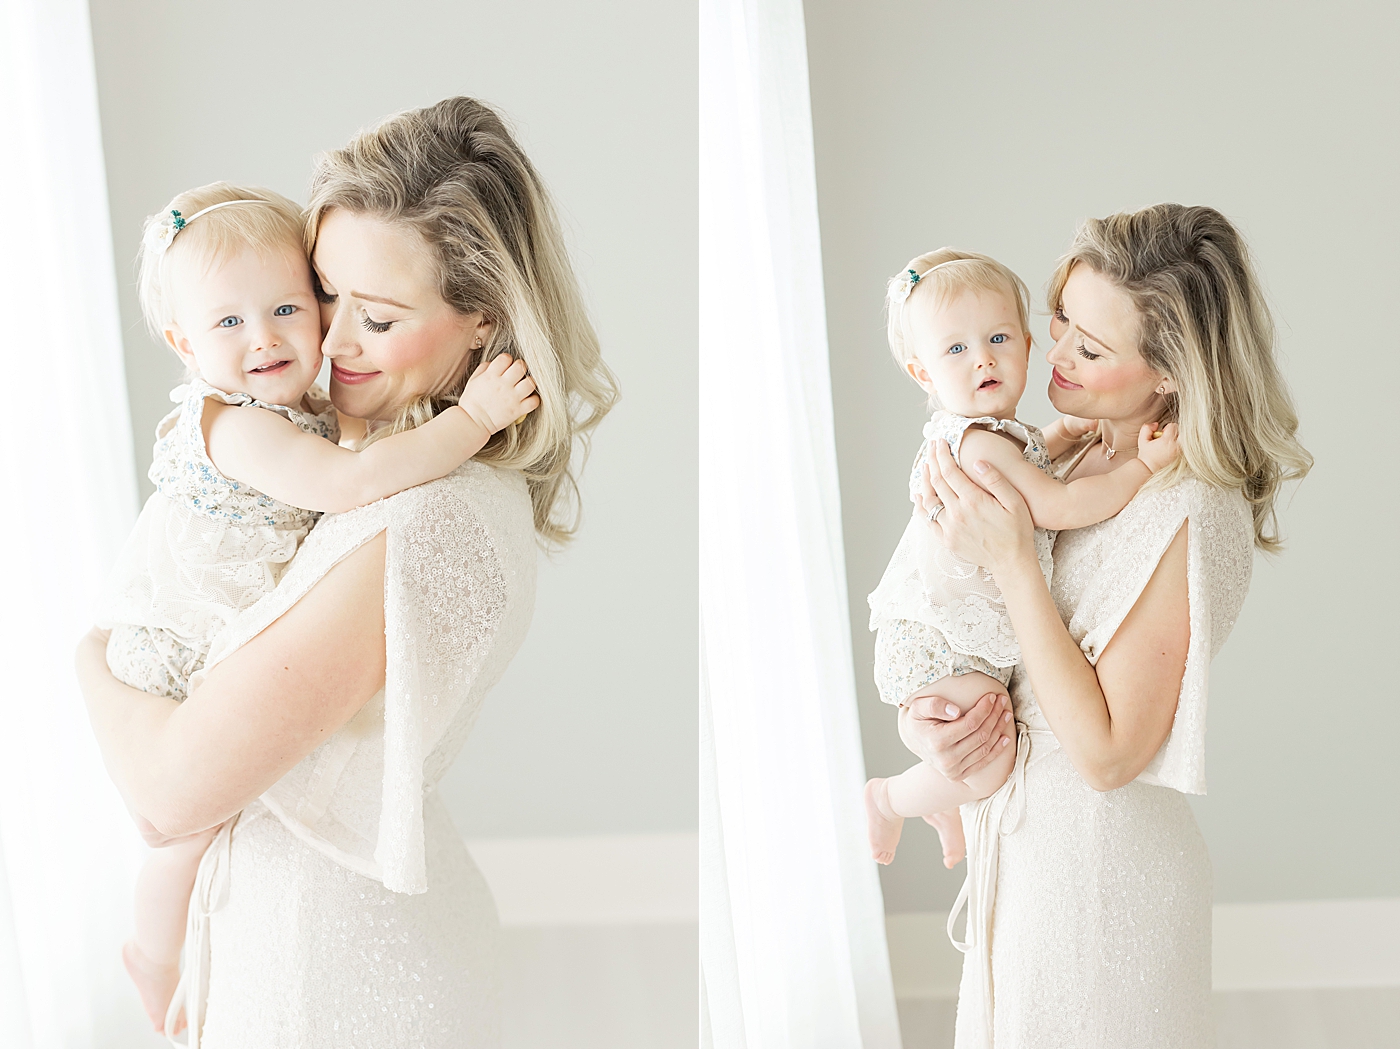 Mom and daughter share a sweet moment during baby girl's one year session with Fresh Light Photography in Houston Studio.